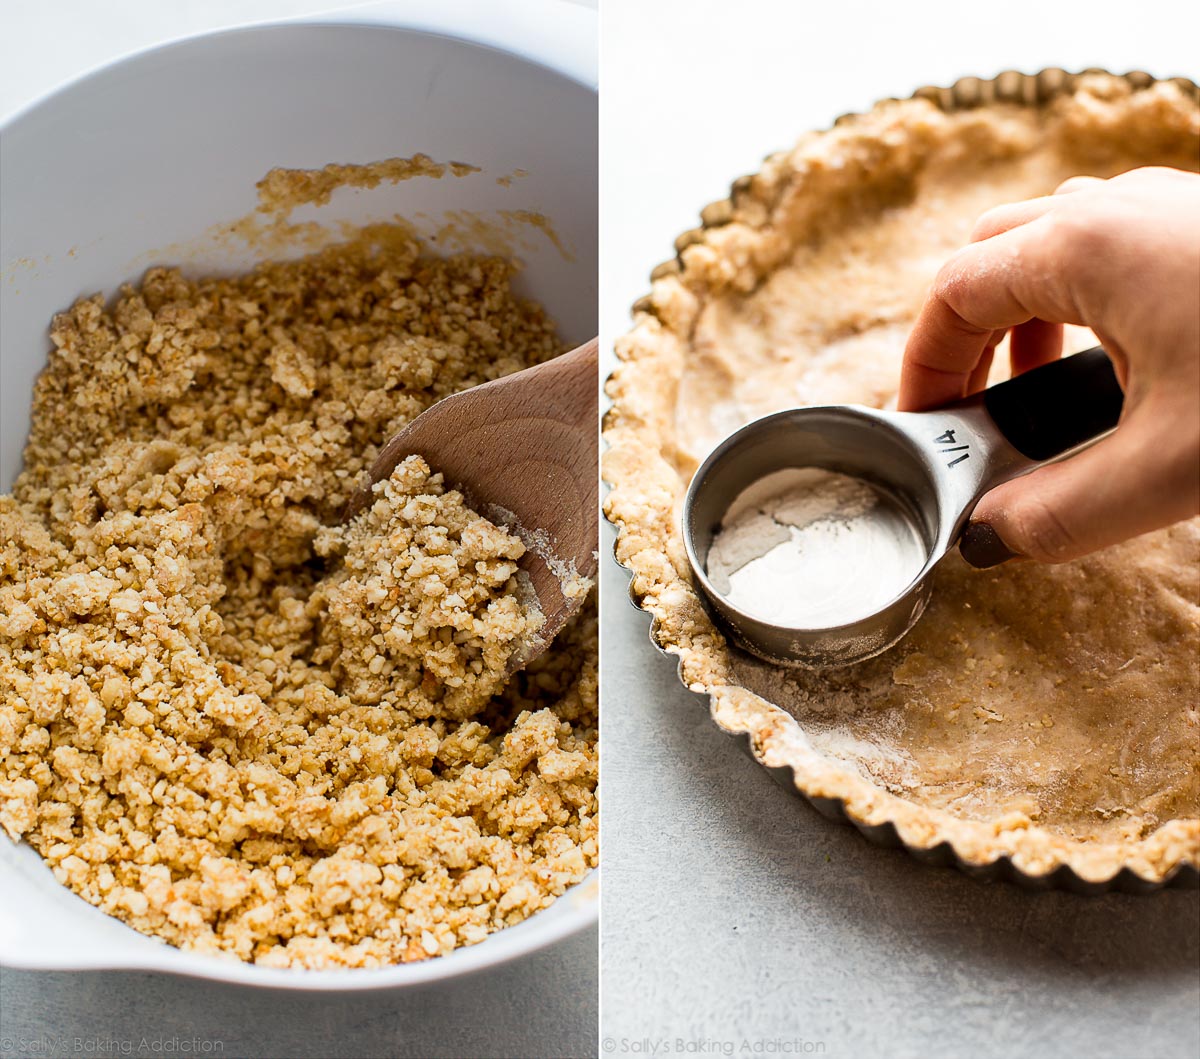 tart crust mixture in a white bowl and pressing tart crust into tart pan with a measuring cup